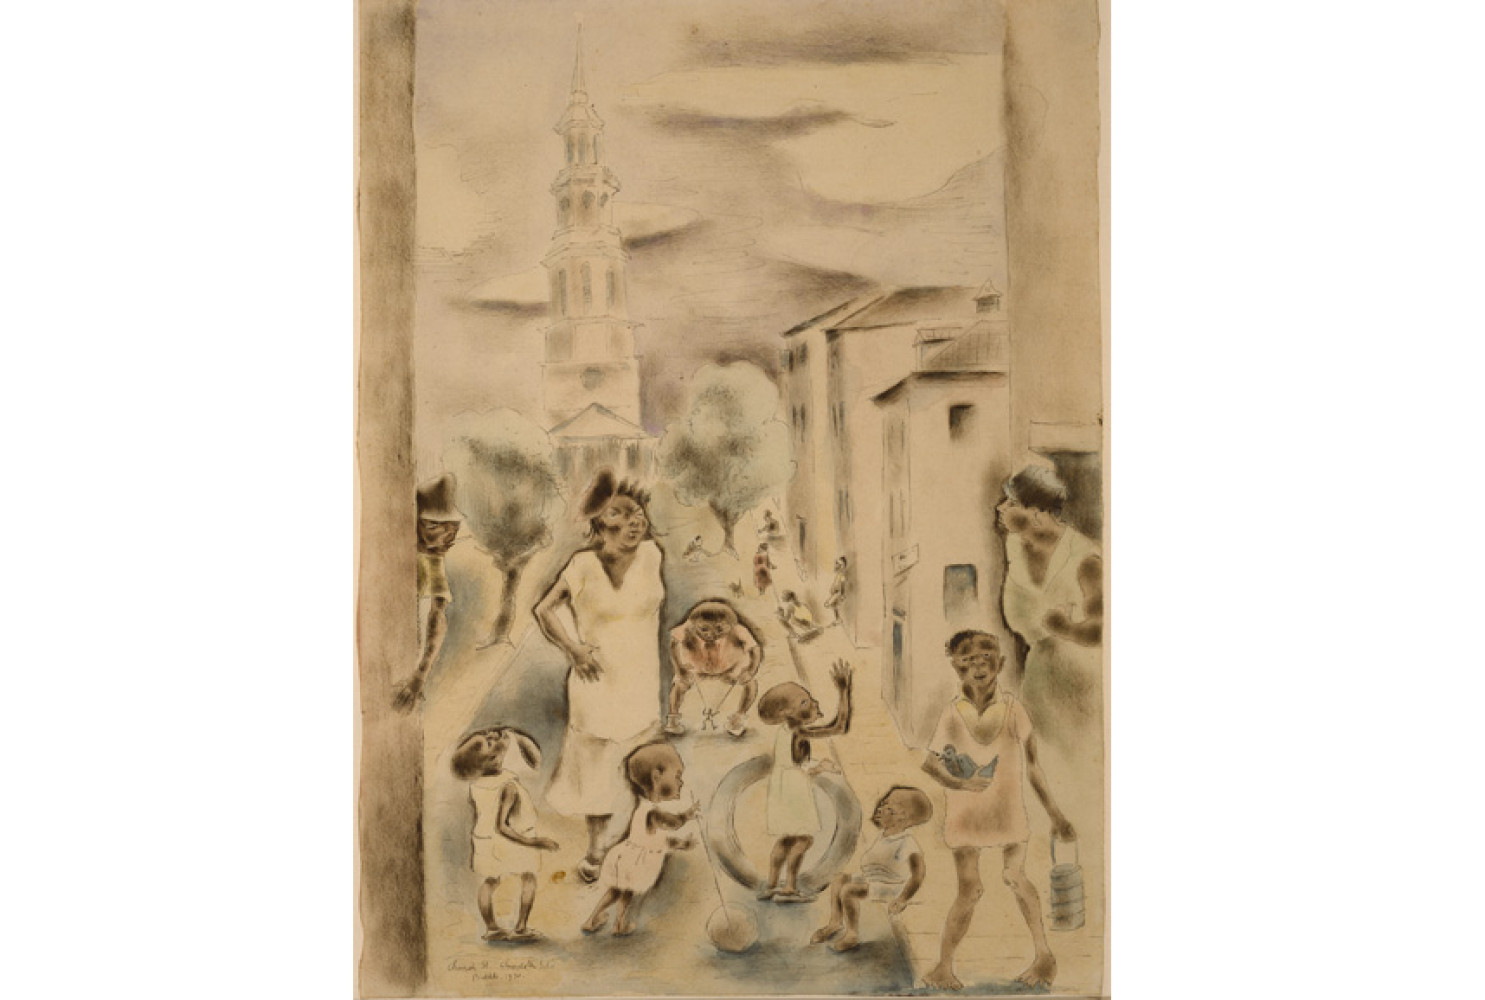 Church Street Amusements, 1930, by George Biddle (American, 1885-1973); watercolor and ink on paper; 15 1/4 x 11 inches; Museum purchase; 1985.027.0001